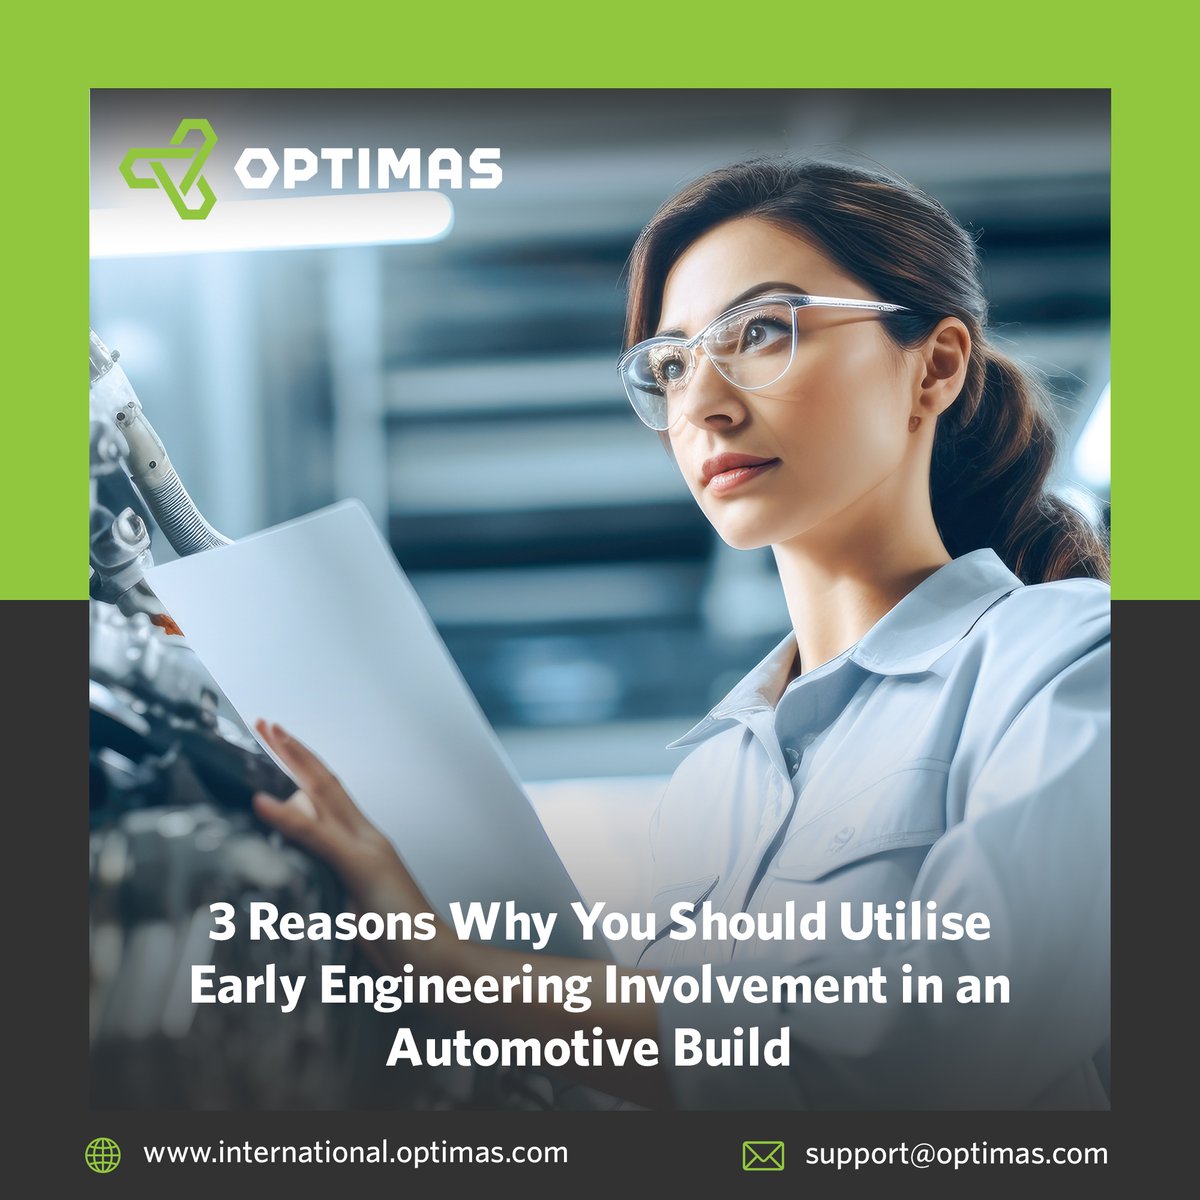 Read below to find out how benefits of early engineering involvement can help you in your automotive builds and get in touch with us so we can help provide solutions to your engineering queries. hubs.li/Q023Q6fl0 #Optimas #Engineering #Solutions #OEM